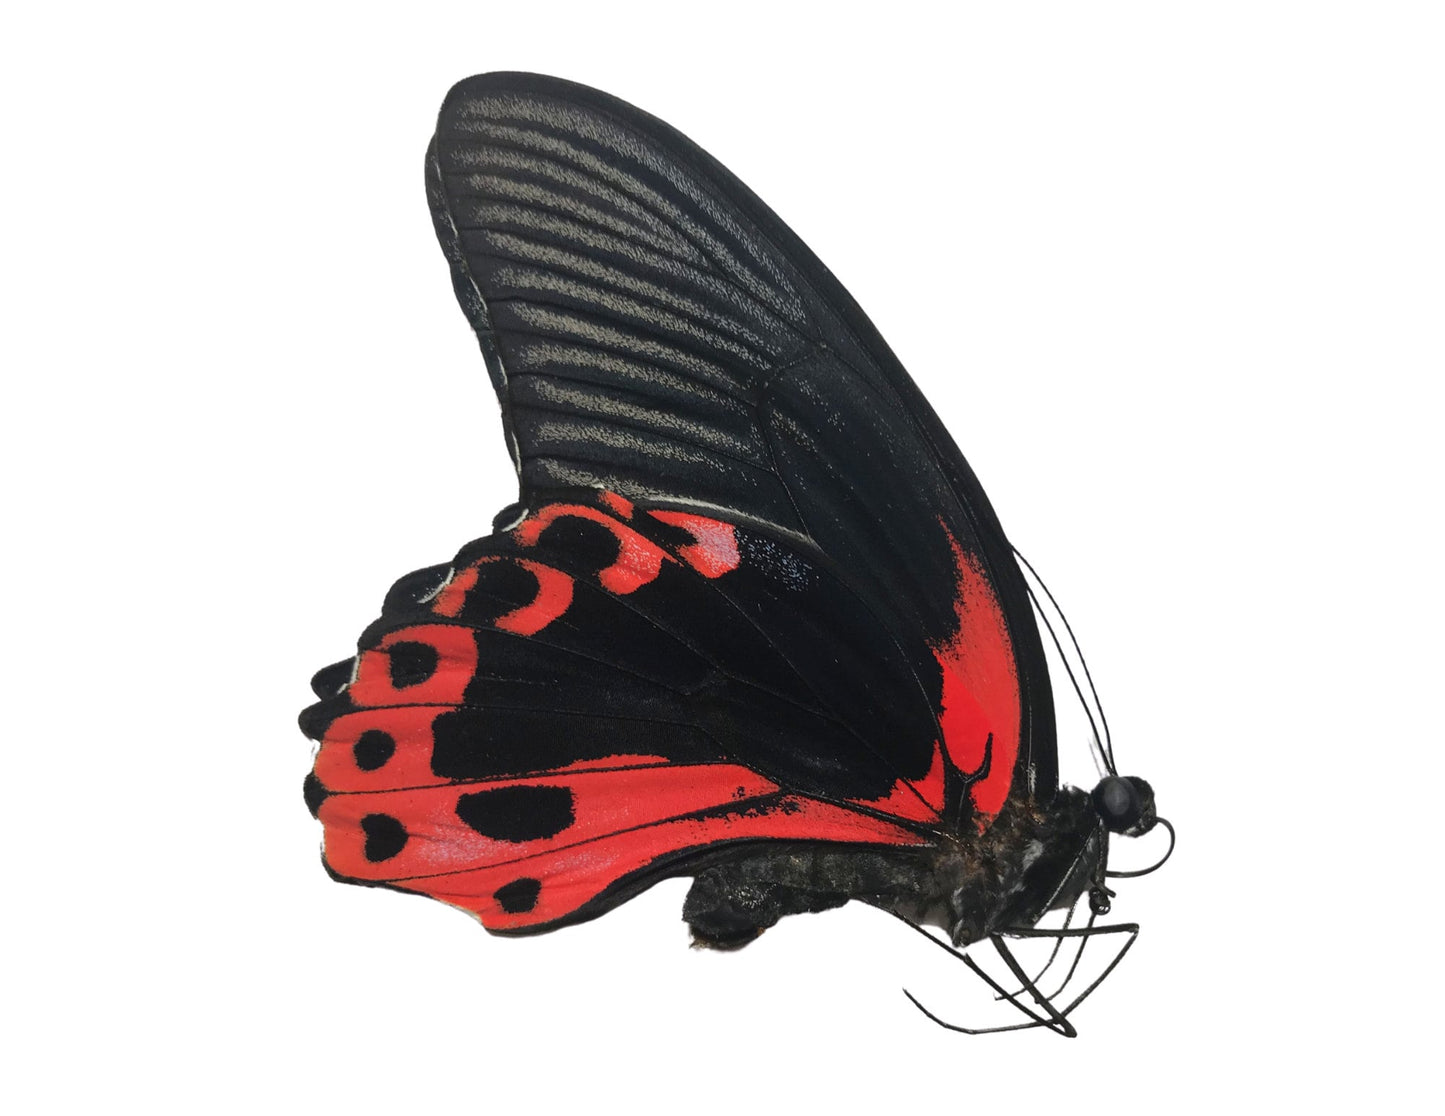 Scarlet Mormon or Red Mormon Swallowtail Butterfly Papilio rumanzovia Real Insect Spread or Folded Taxidermy